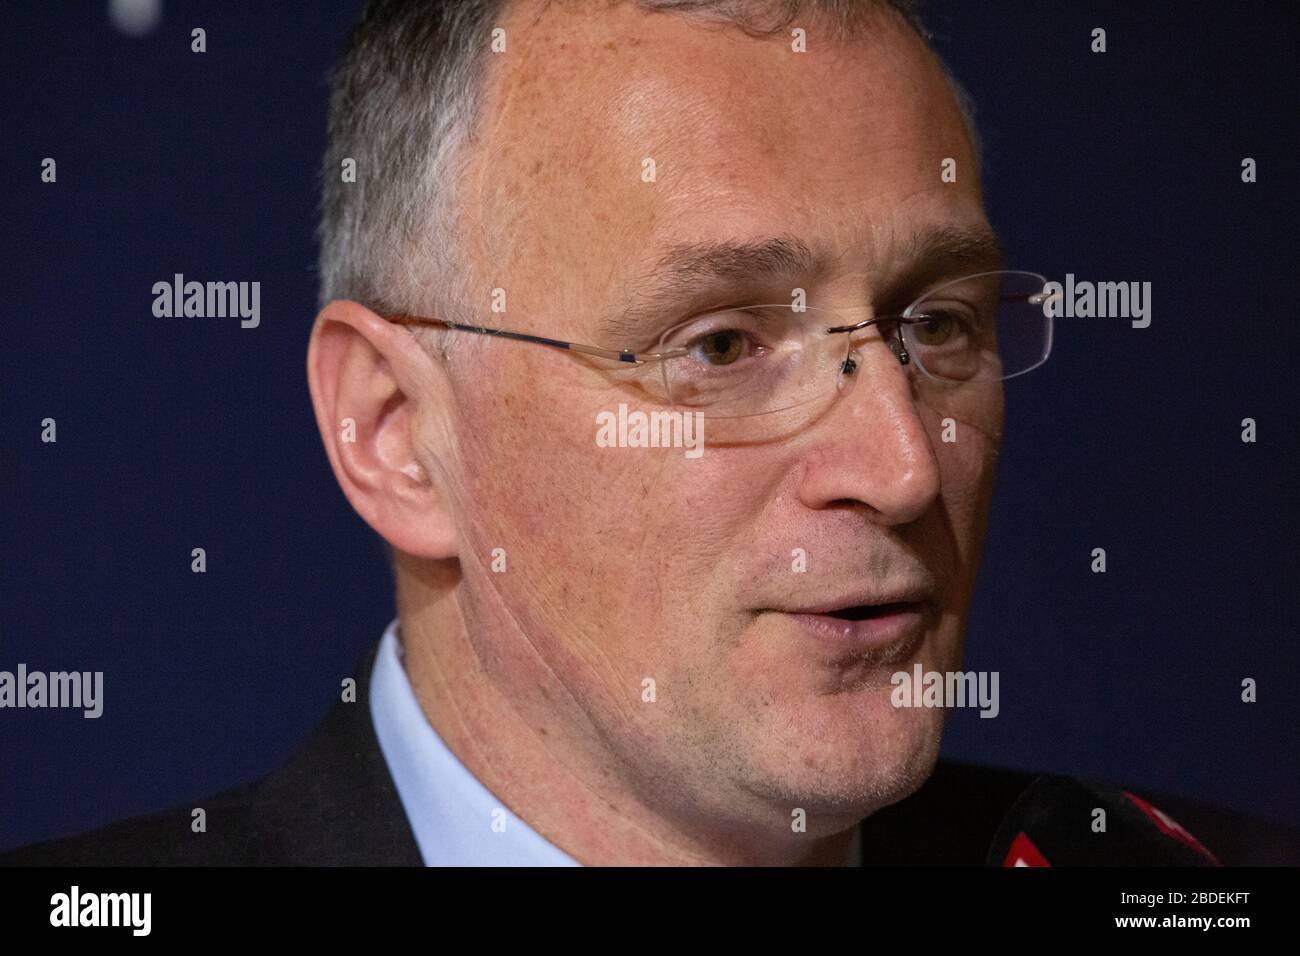 Italian-american expert in nano-medicine Mauro Ferrari photographed during the World Economic Forum in Davos. Mauro Ferrari resigned unexpectedly as President of the European Research Council on Wednesday April 8th 2020, citing an uncoordinated response to the COVID-19 pandemy. Stock Photo